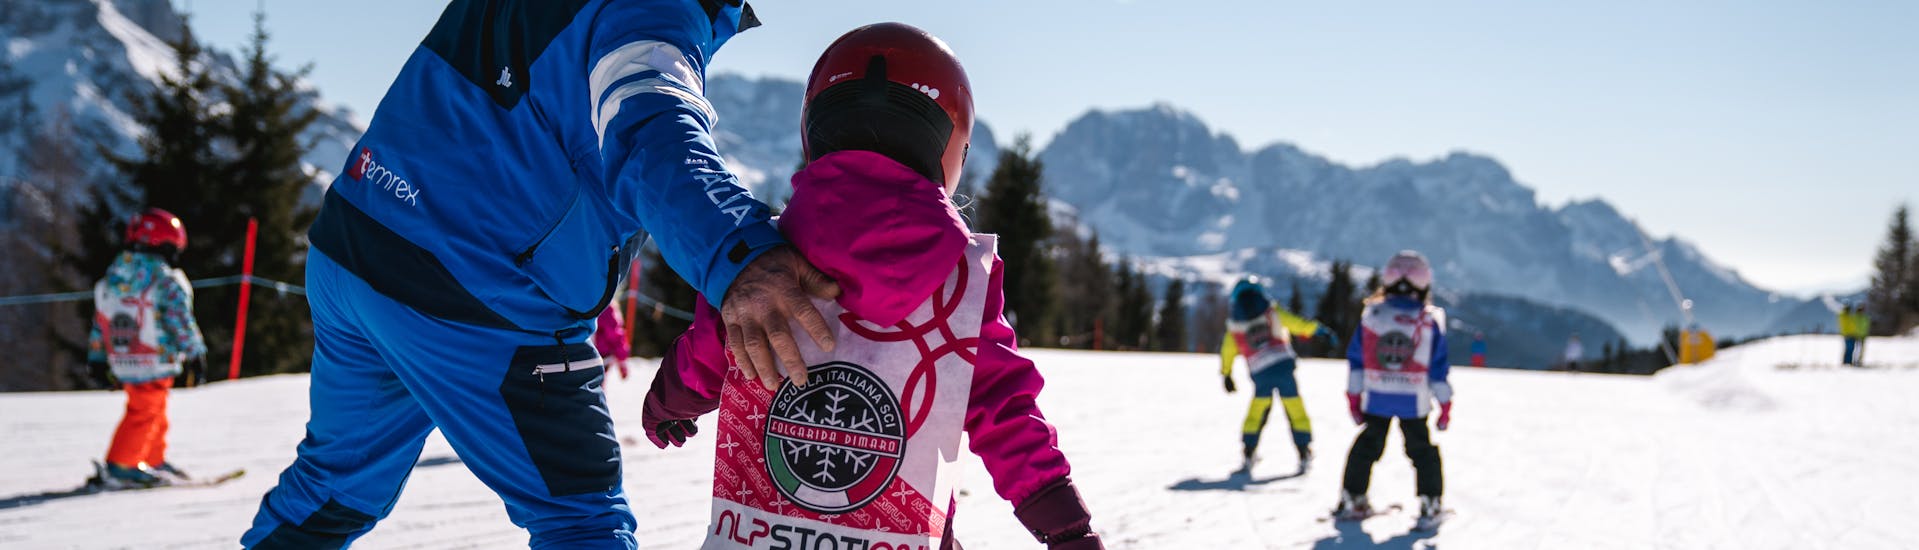 Kids Ski Lessons (3-4 years) for First Timers.